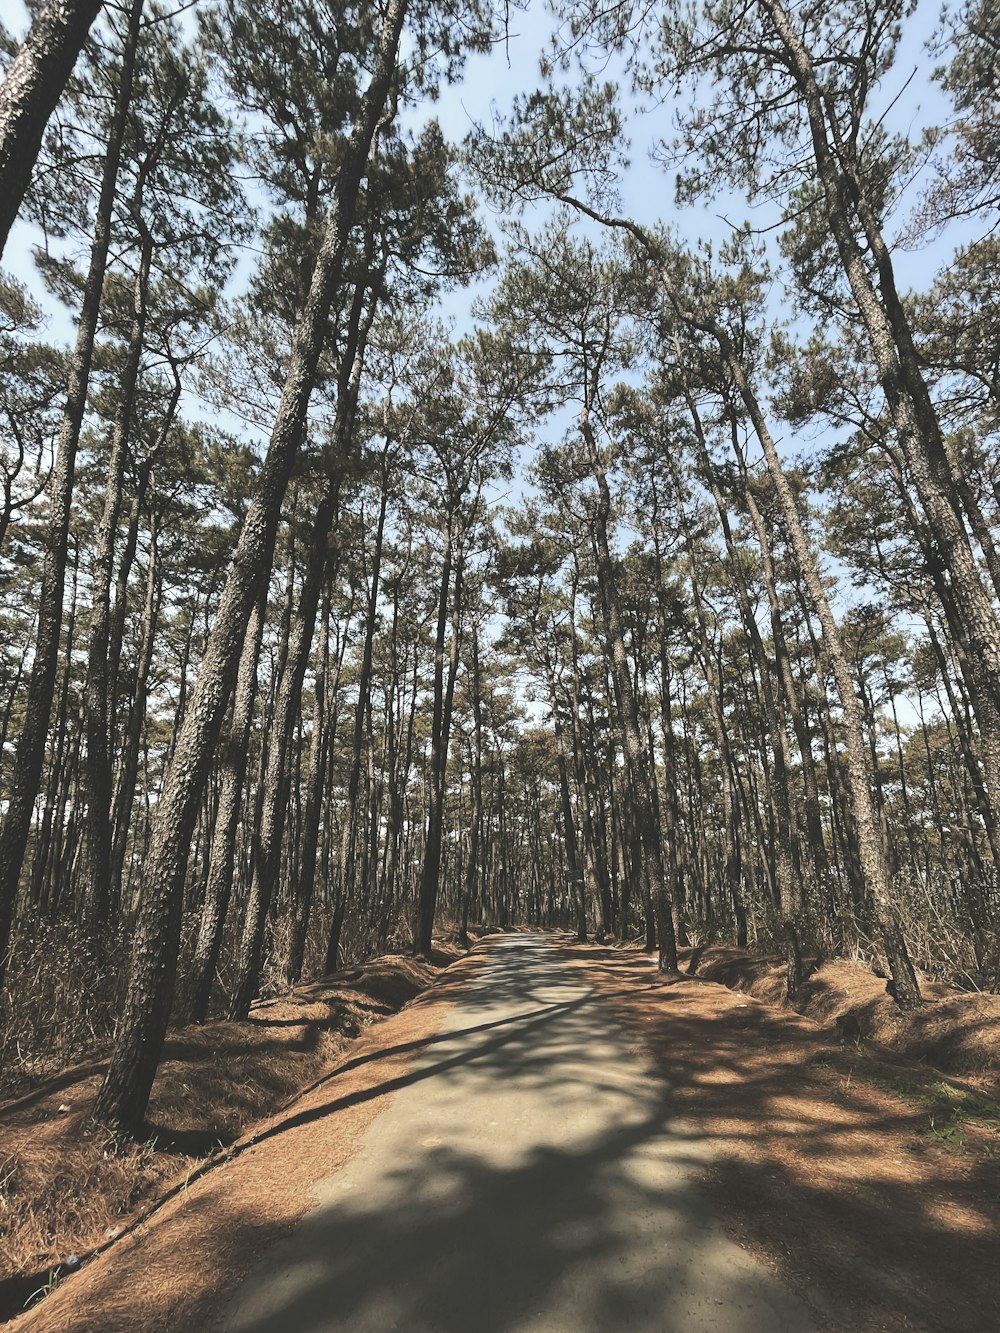 a dirt road surrounded by tall pine trees